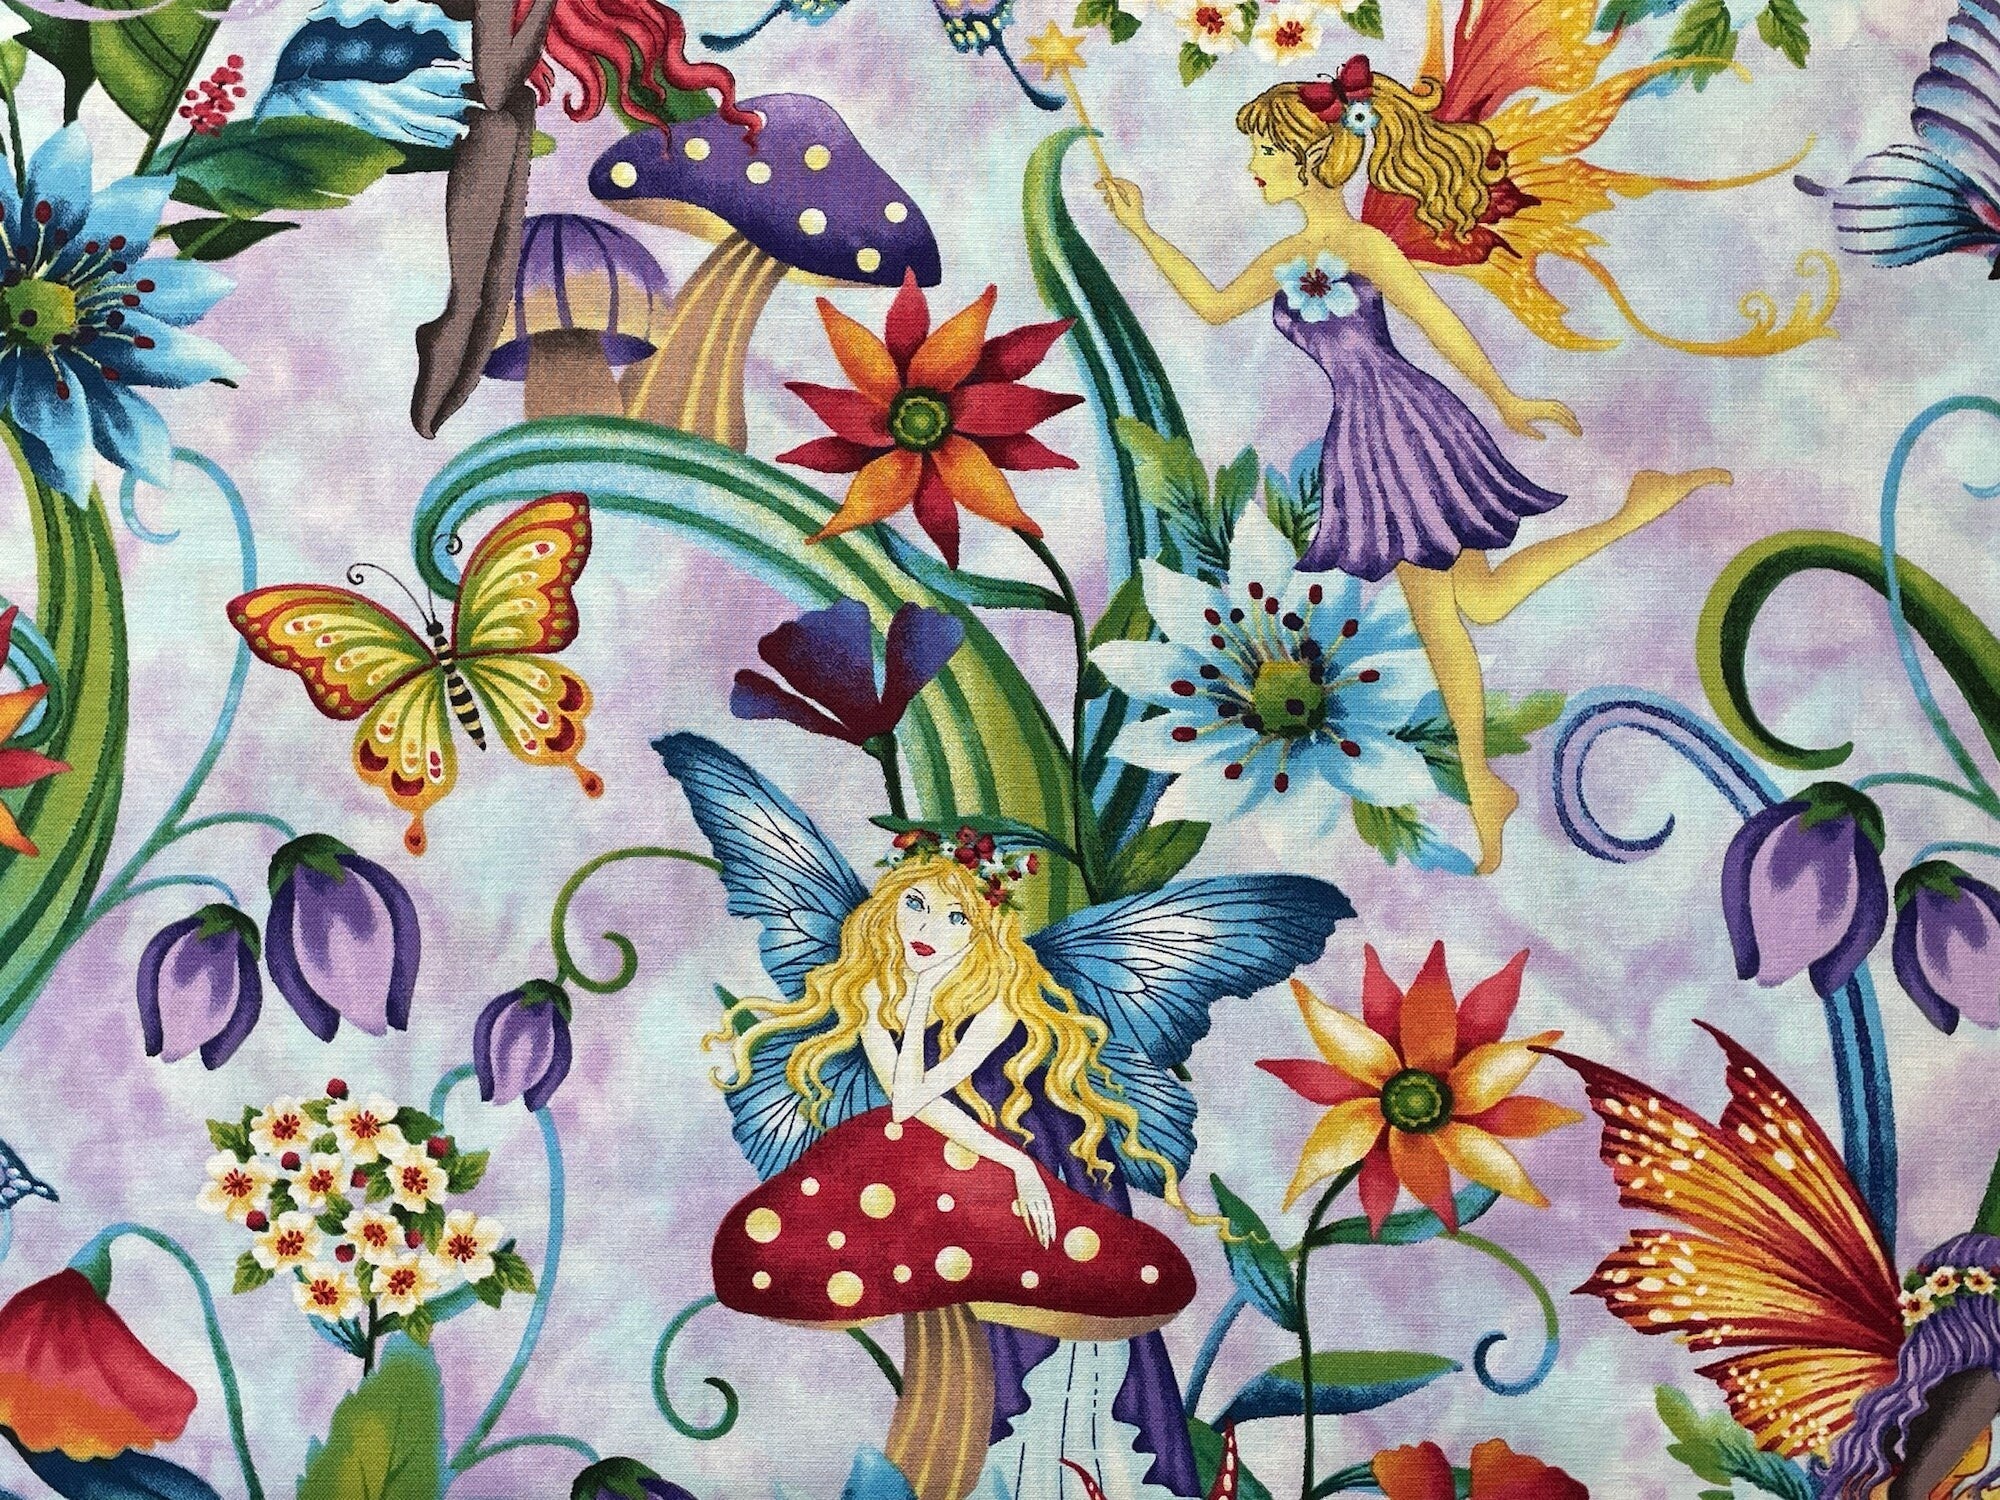 This fabric is part of the Fairytale Forest collection by Henry Glass. This lavender fabric is covered with fairies, toadstools, flowers, butterflies and more